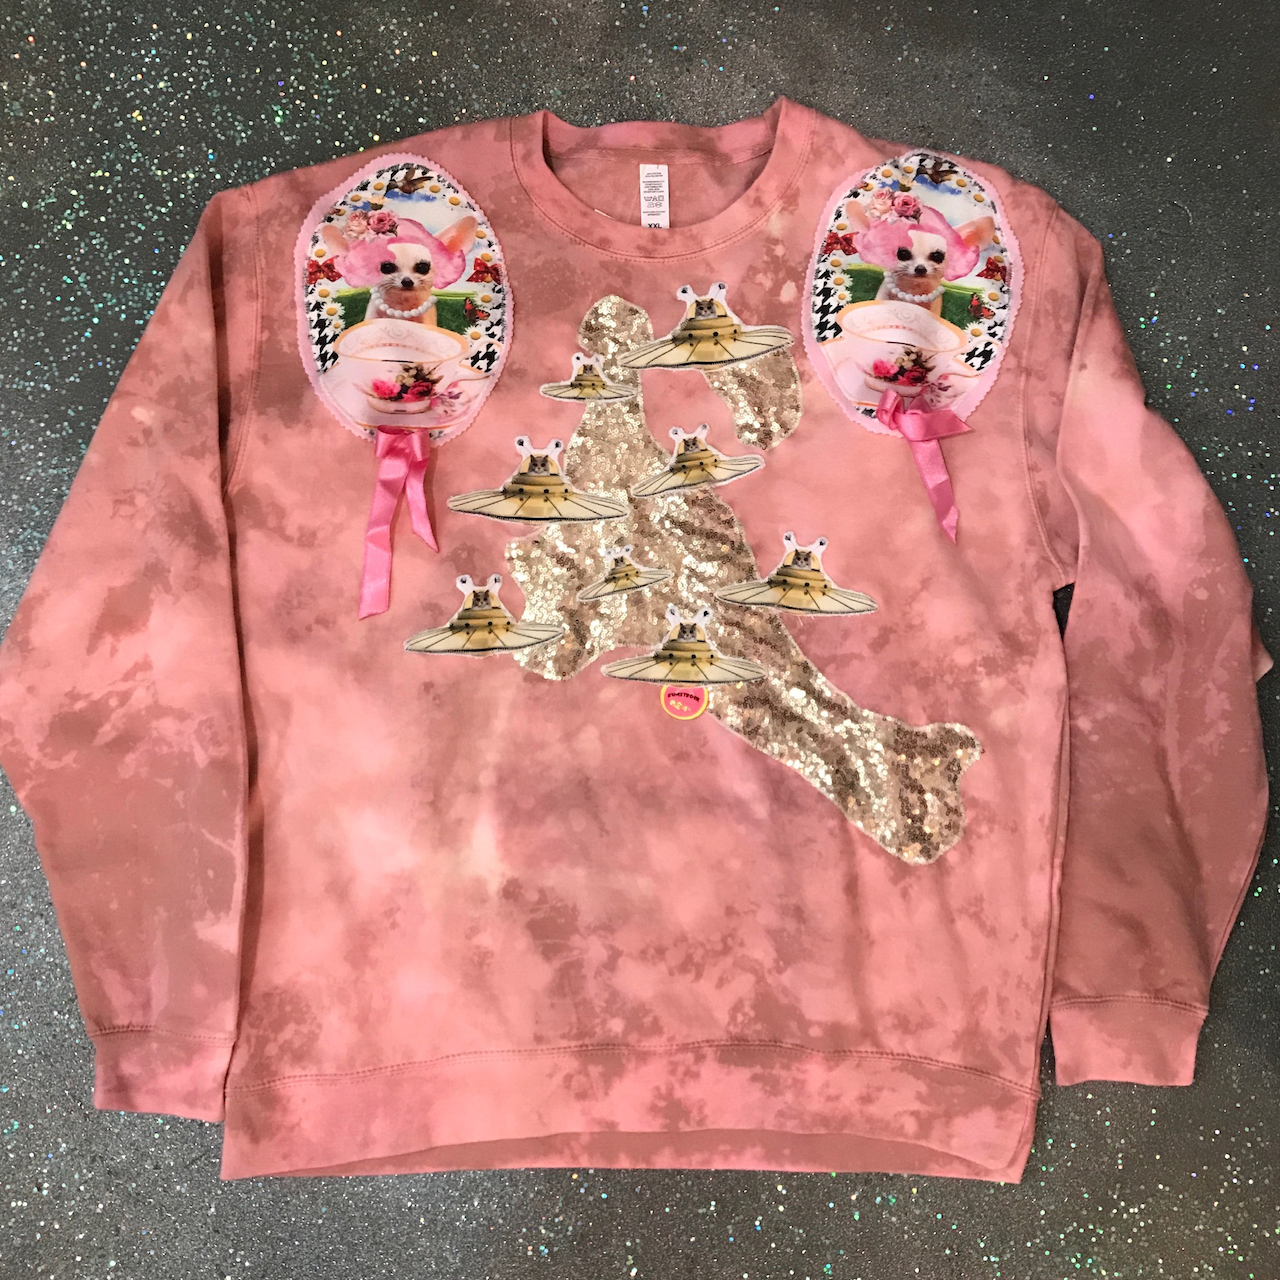 Sweatshirt - 2XL - Pink with Chihuahuas, UFO Cats, Sequins, and Ribbons